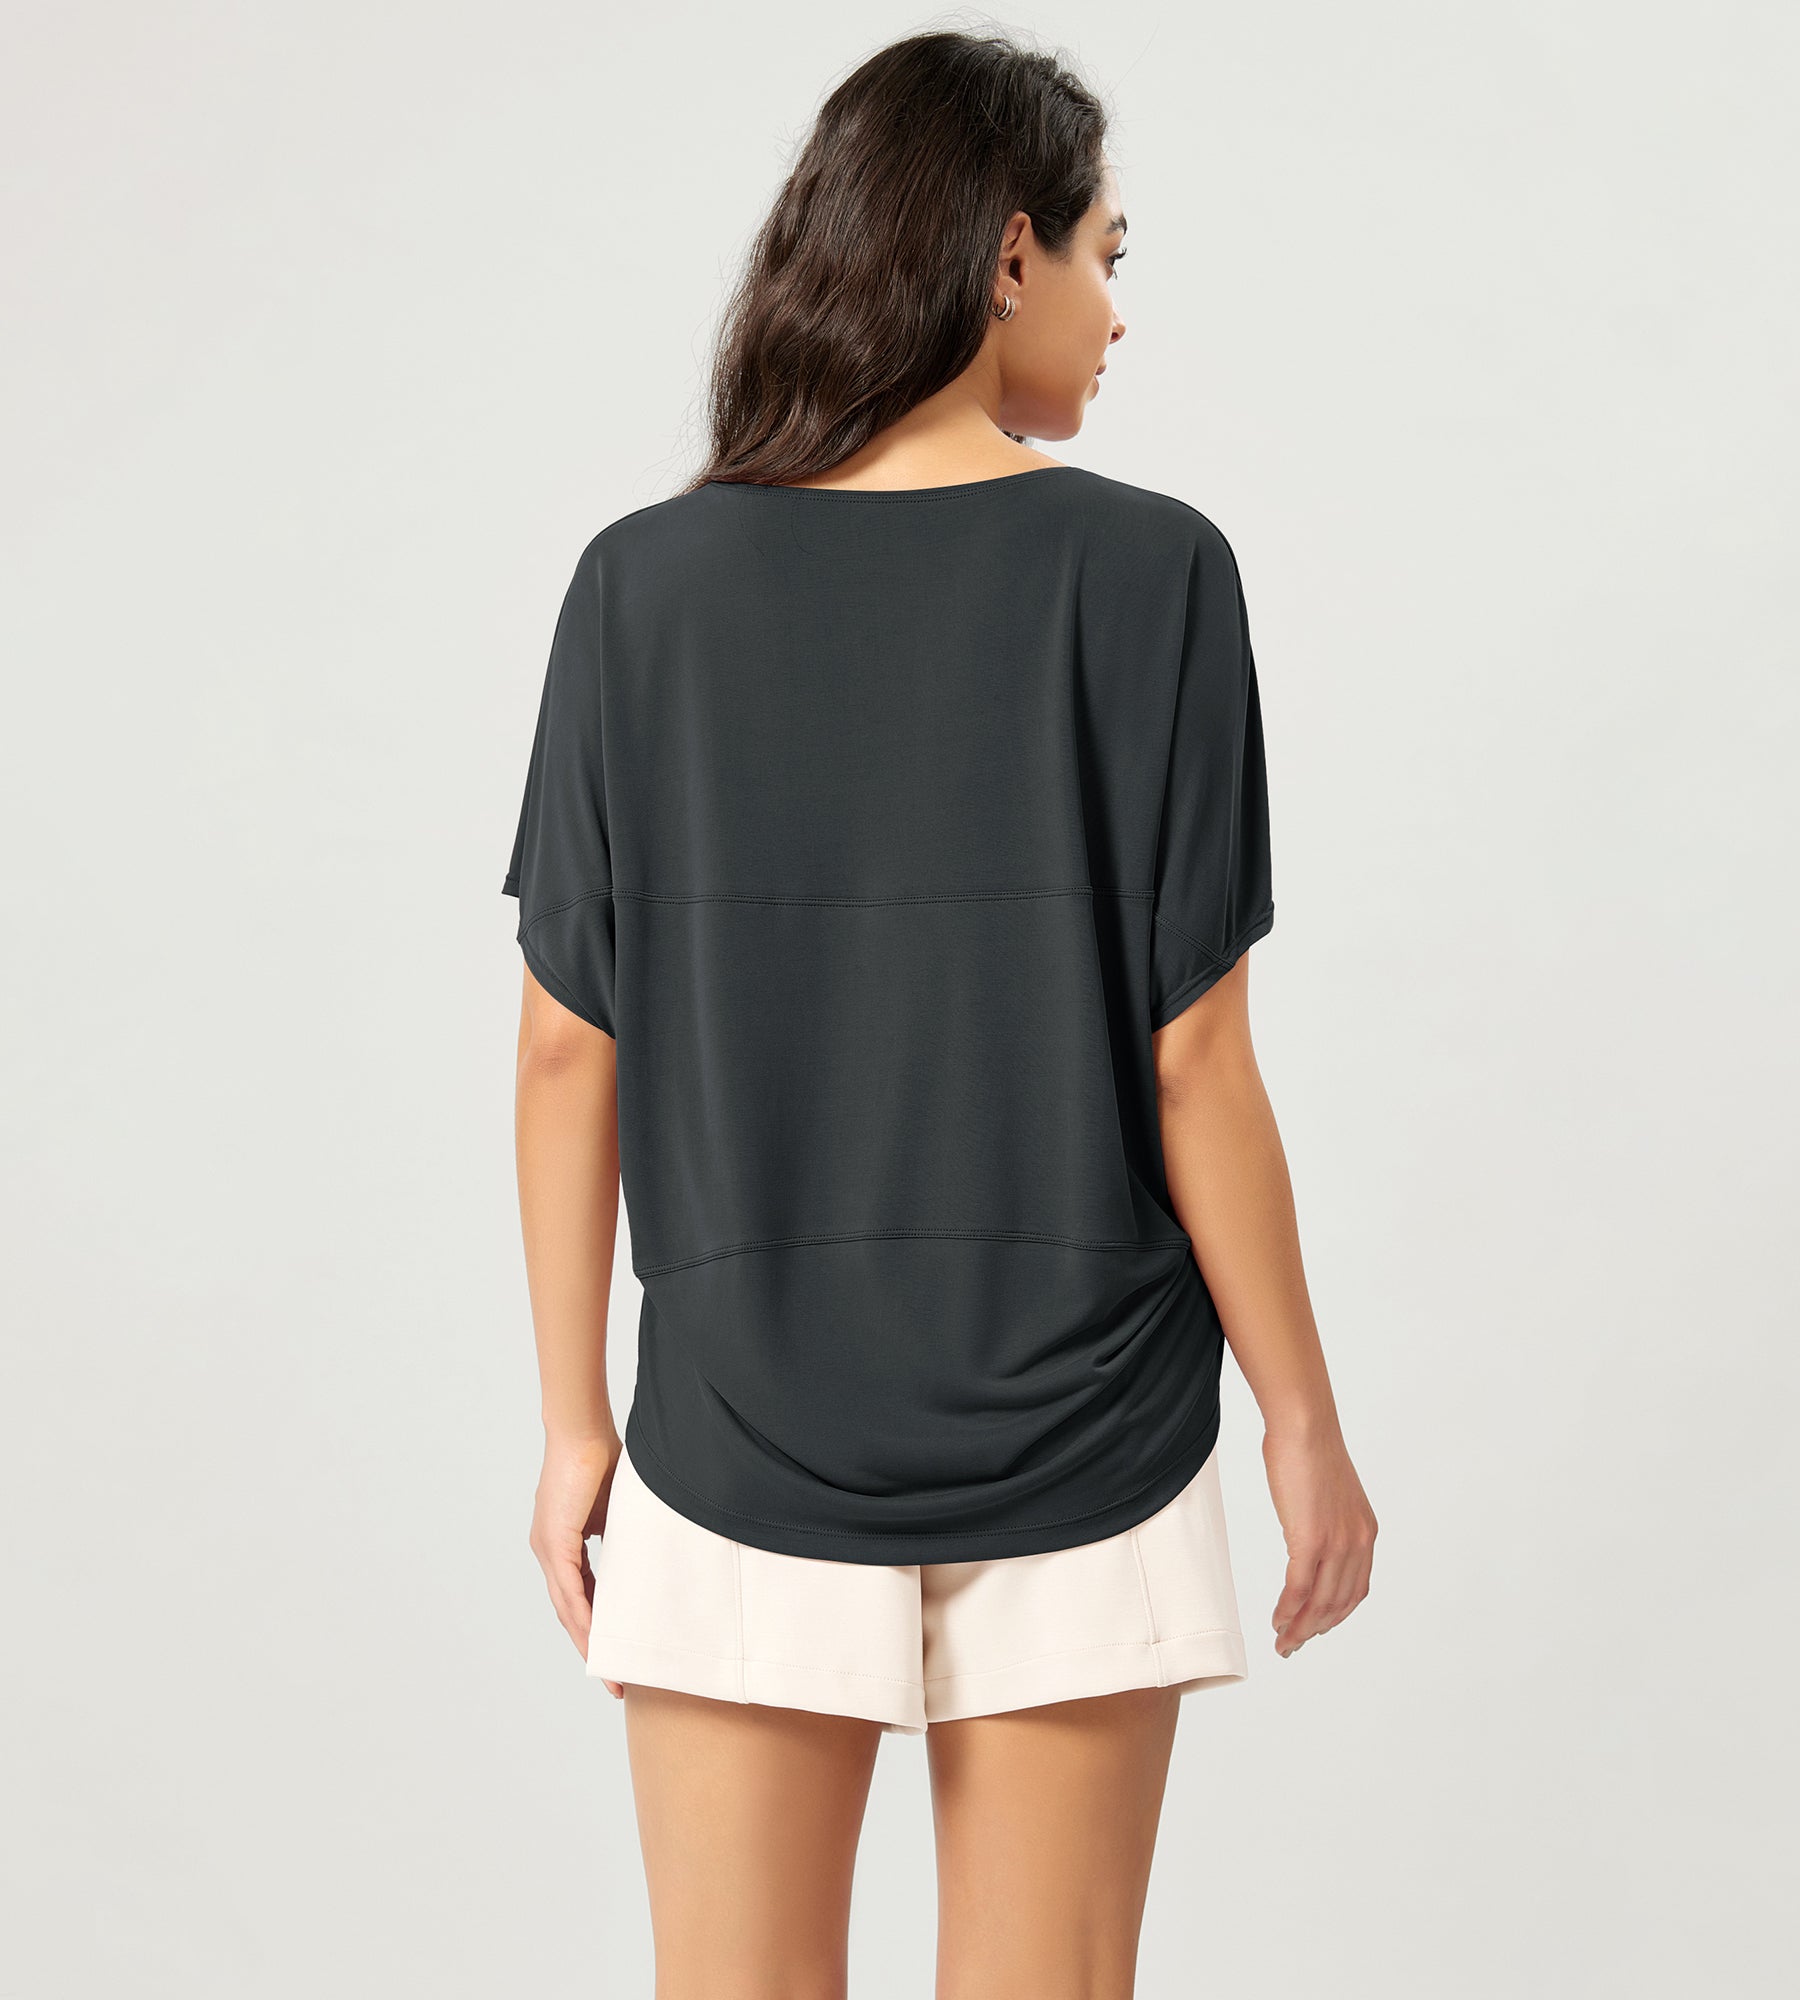 Modal Soft Boat Neck Casual Batwing Tee Shirts - ododos